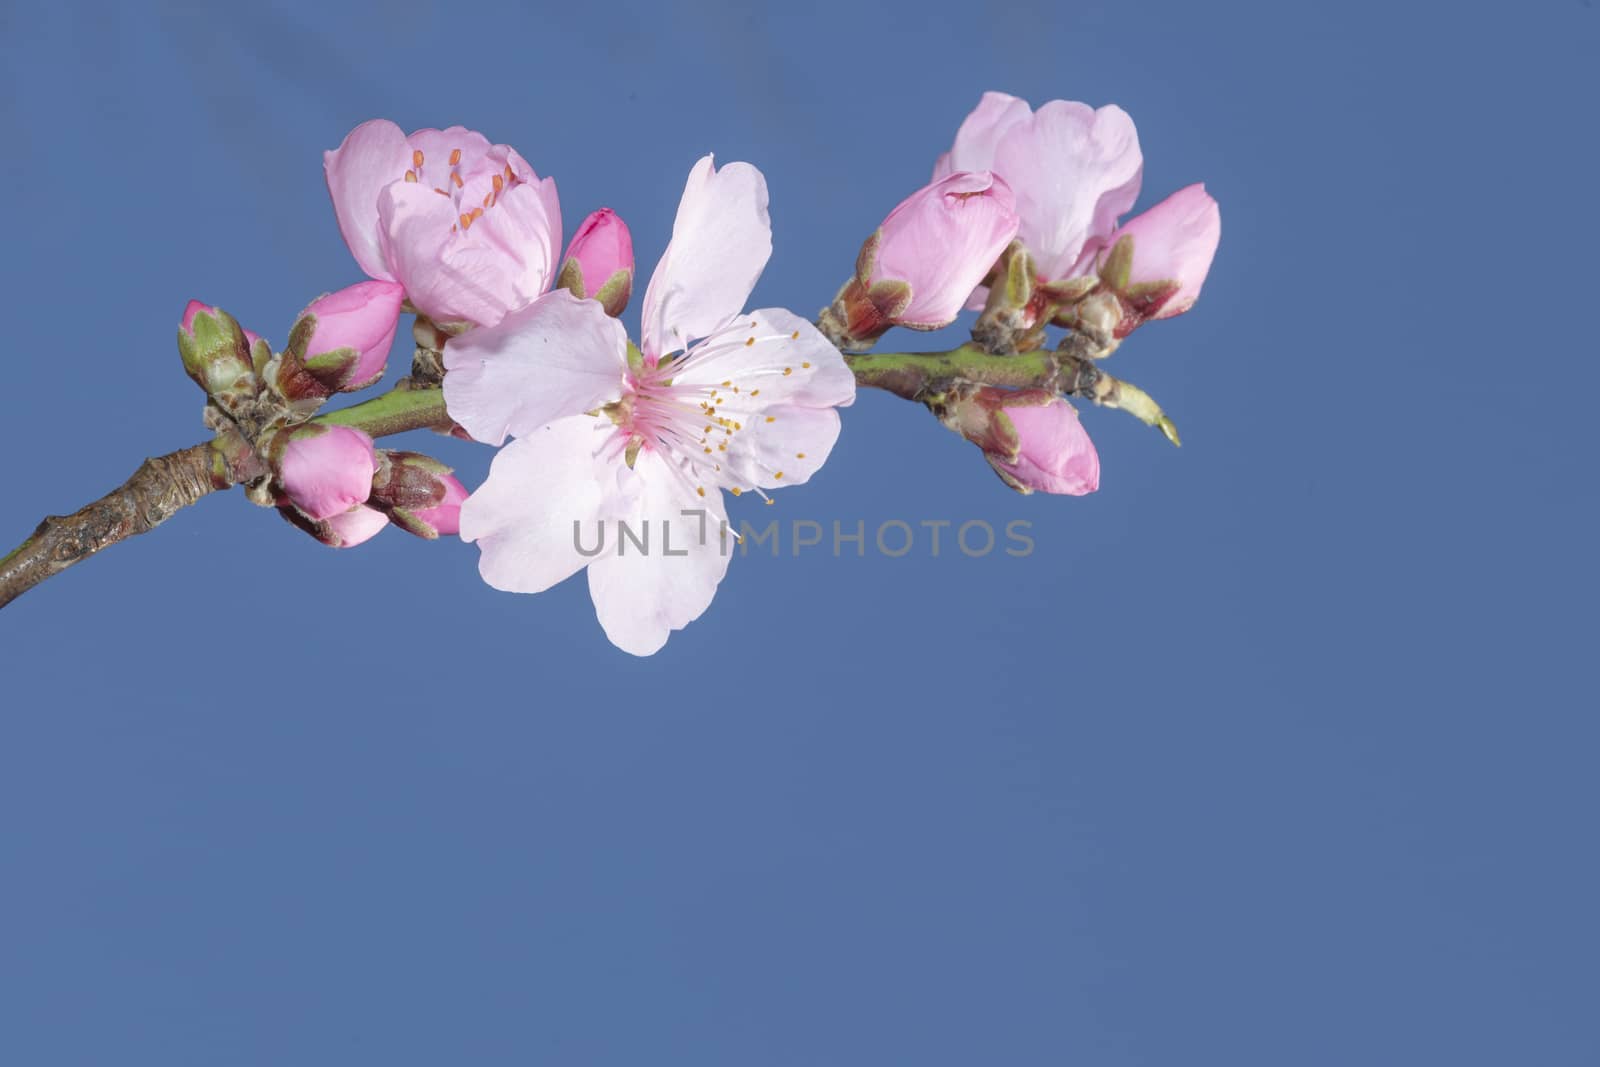 Pink Japanese cherry blossom blooming season under a ending winter blue sky